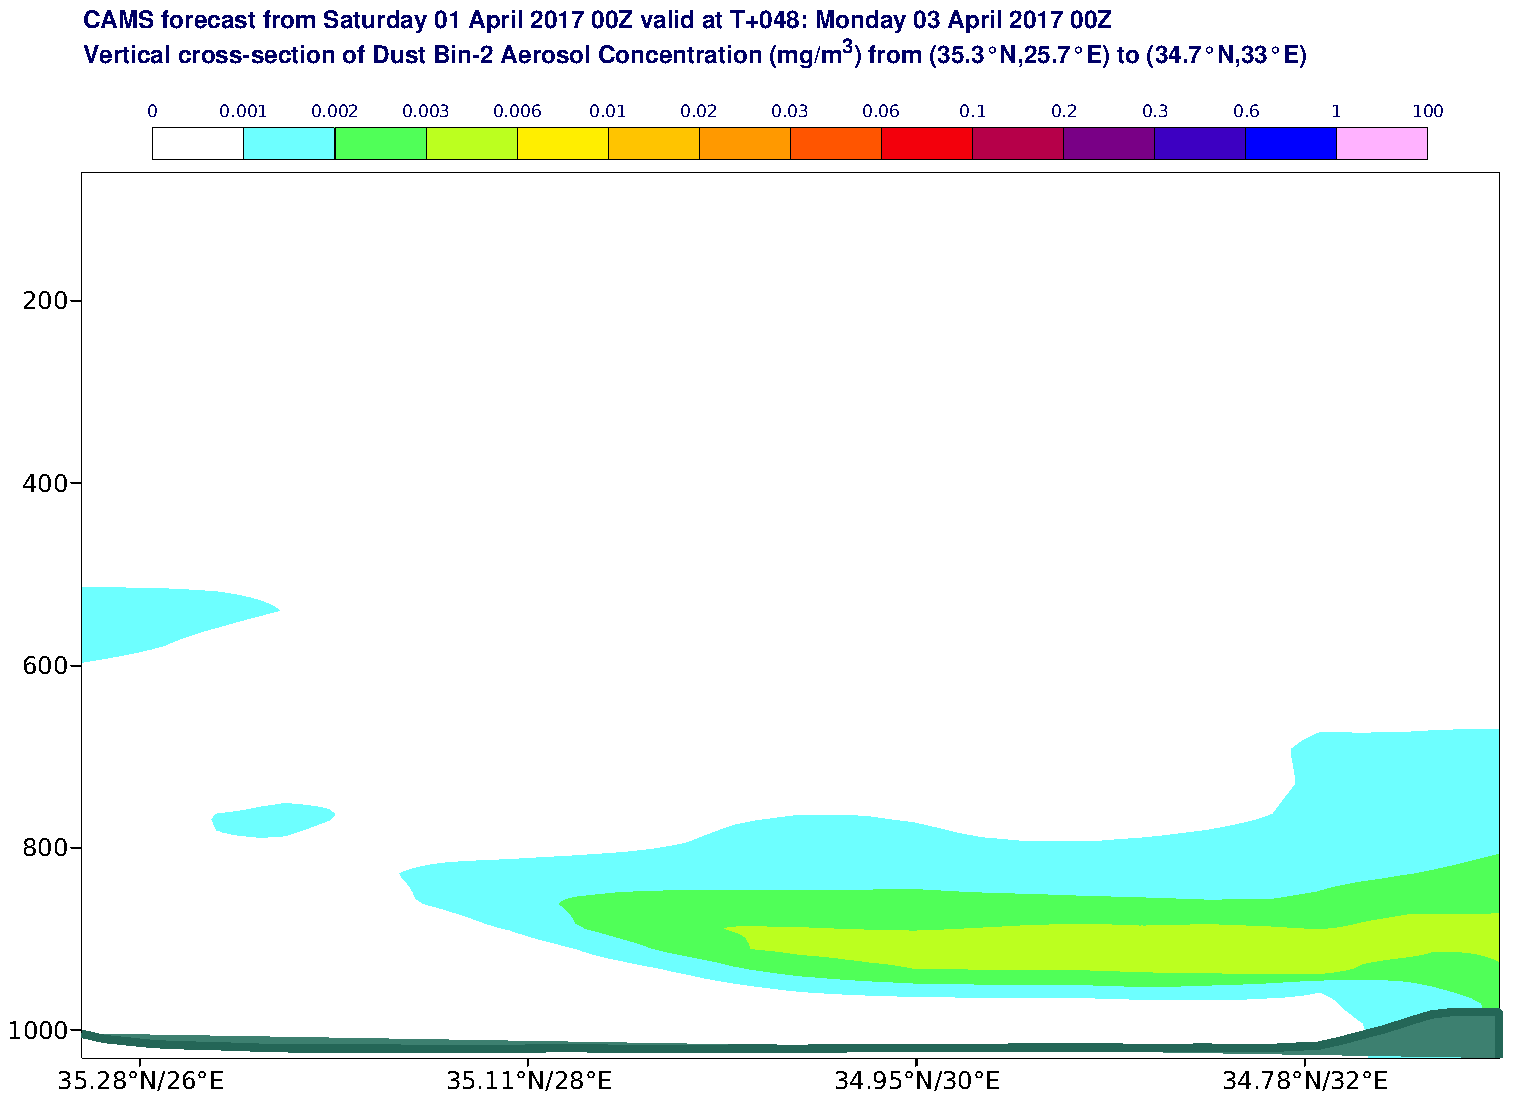 Vertical cross-section of Dust Bin-2 Aerosol Concentration (mg/m3) valid at T48 - 2017-04-03 00:00